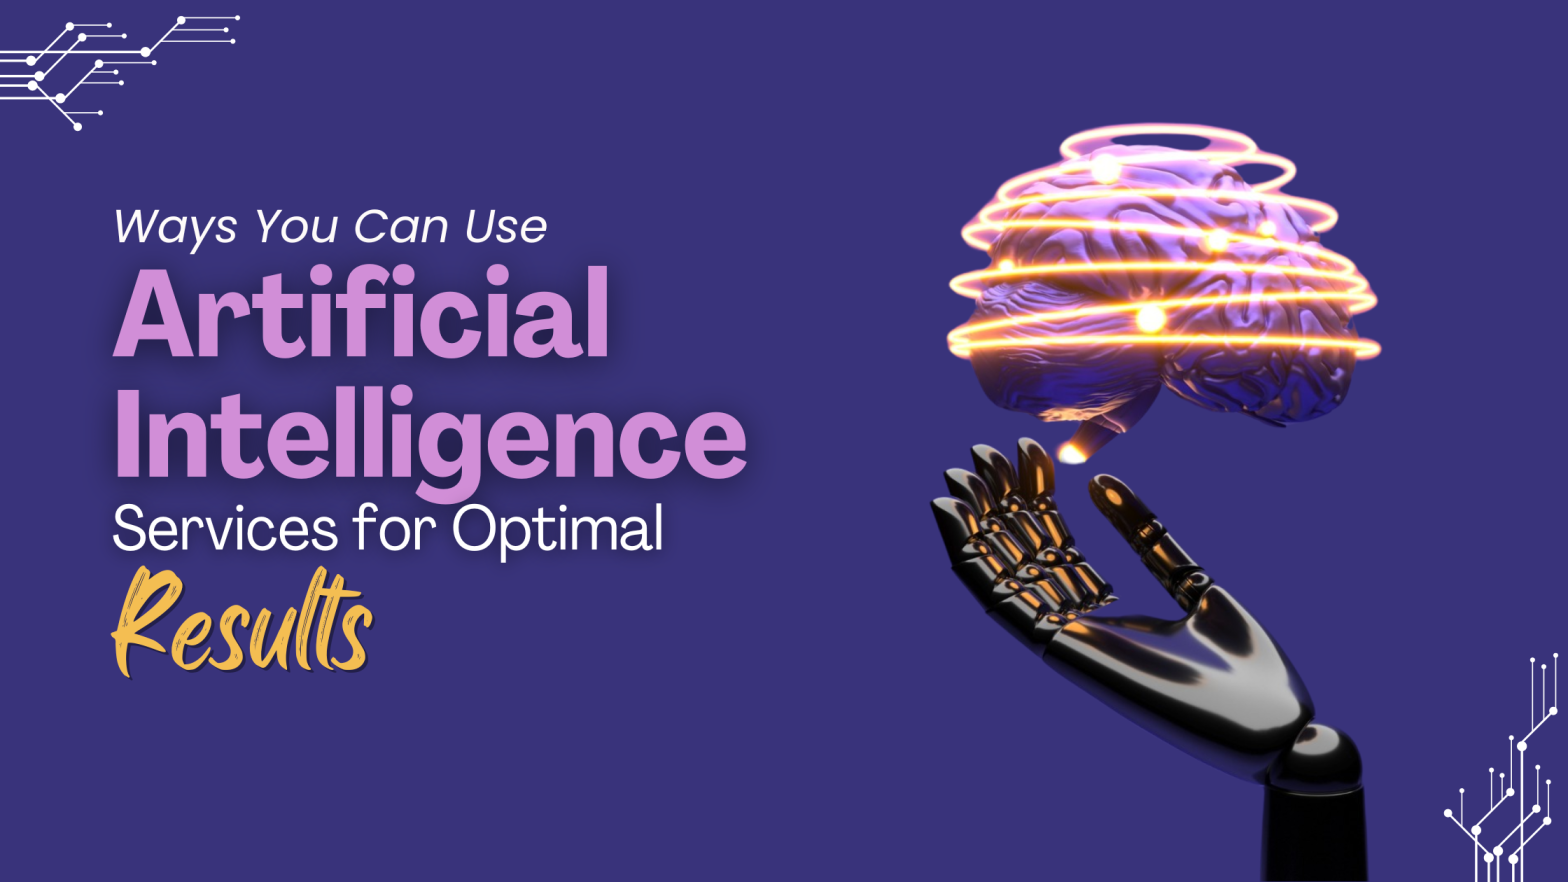 Use Artificial Intelligence Services for Optimal Results